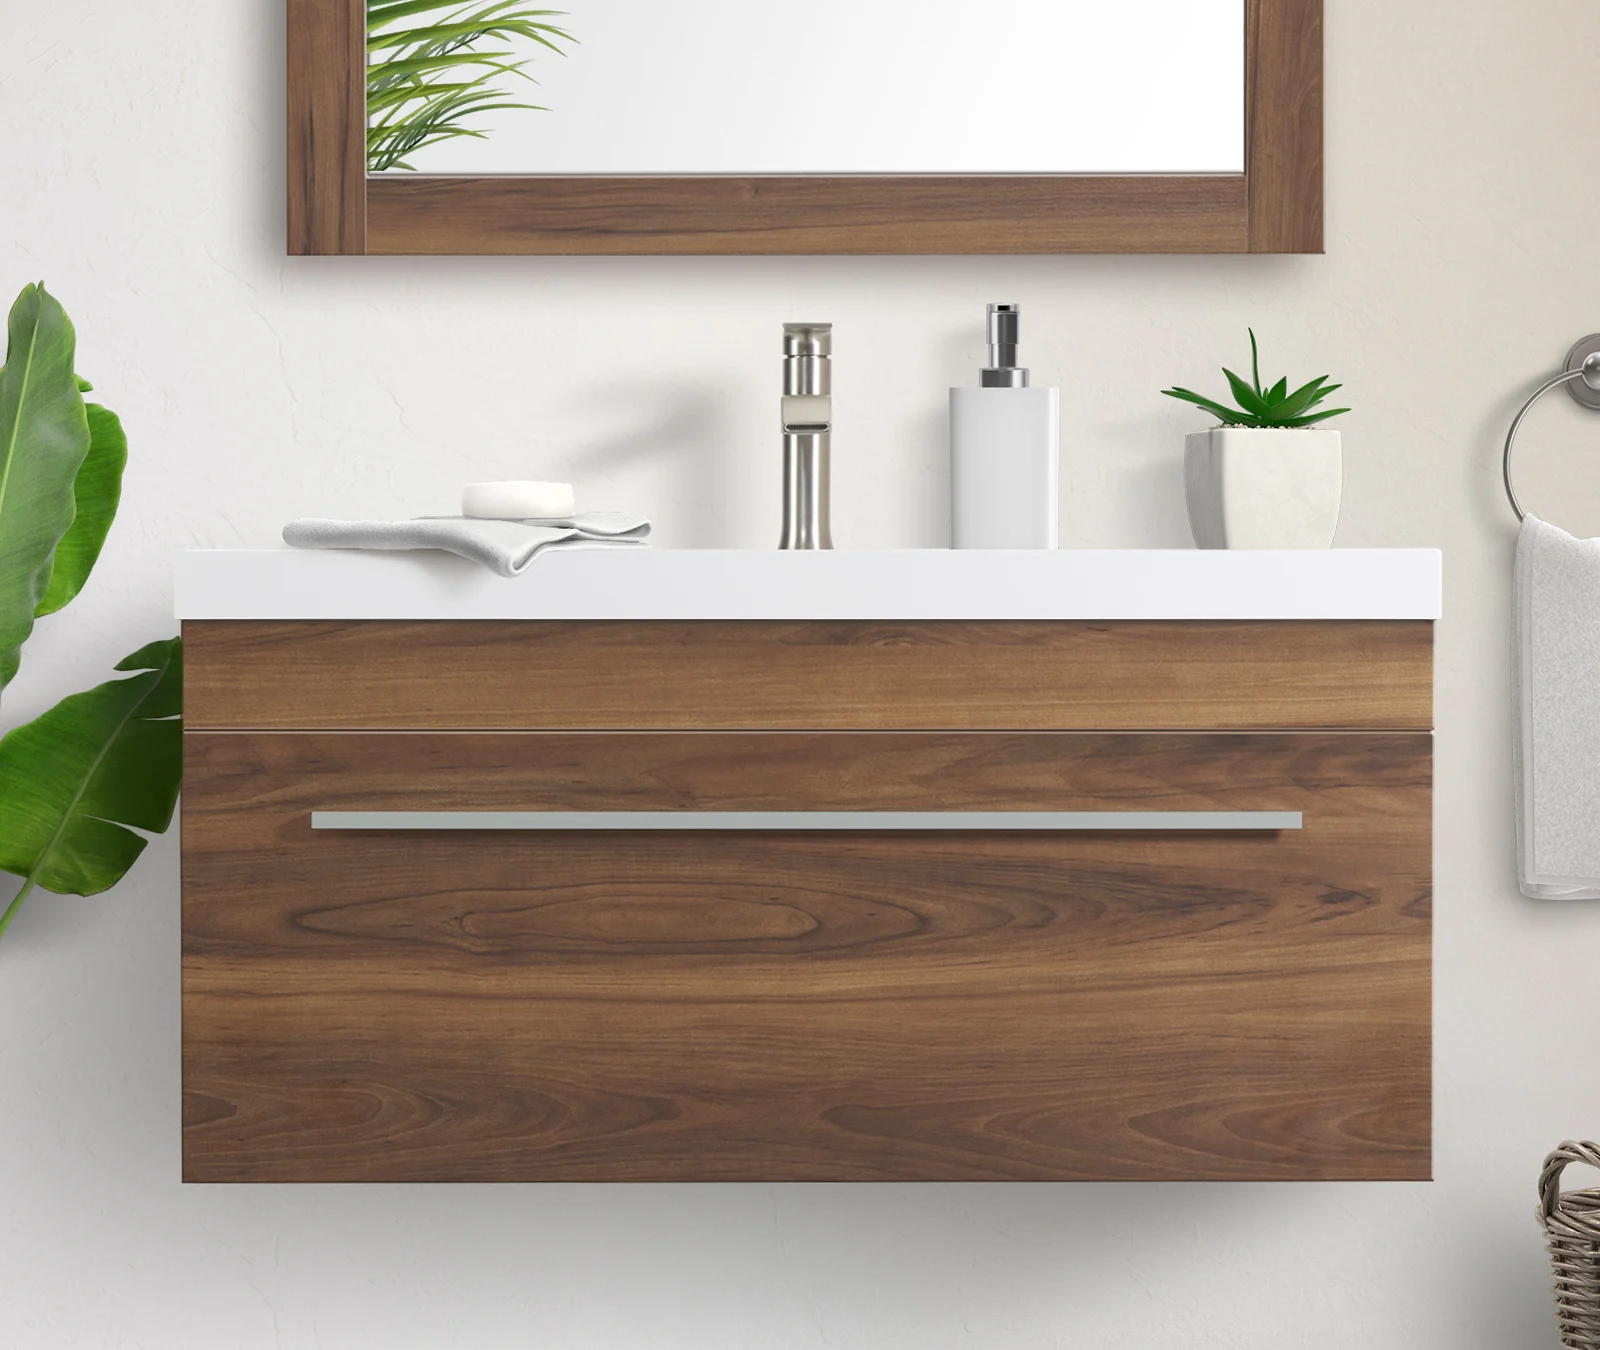 A wooden wall mounted vanity